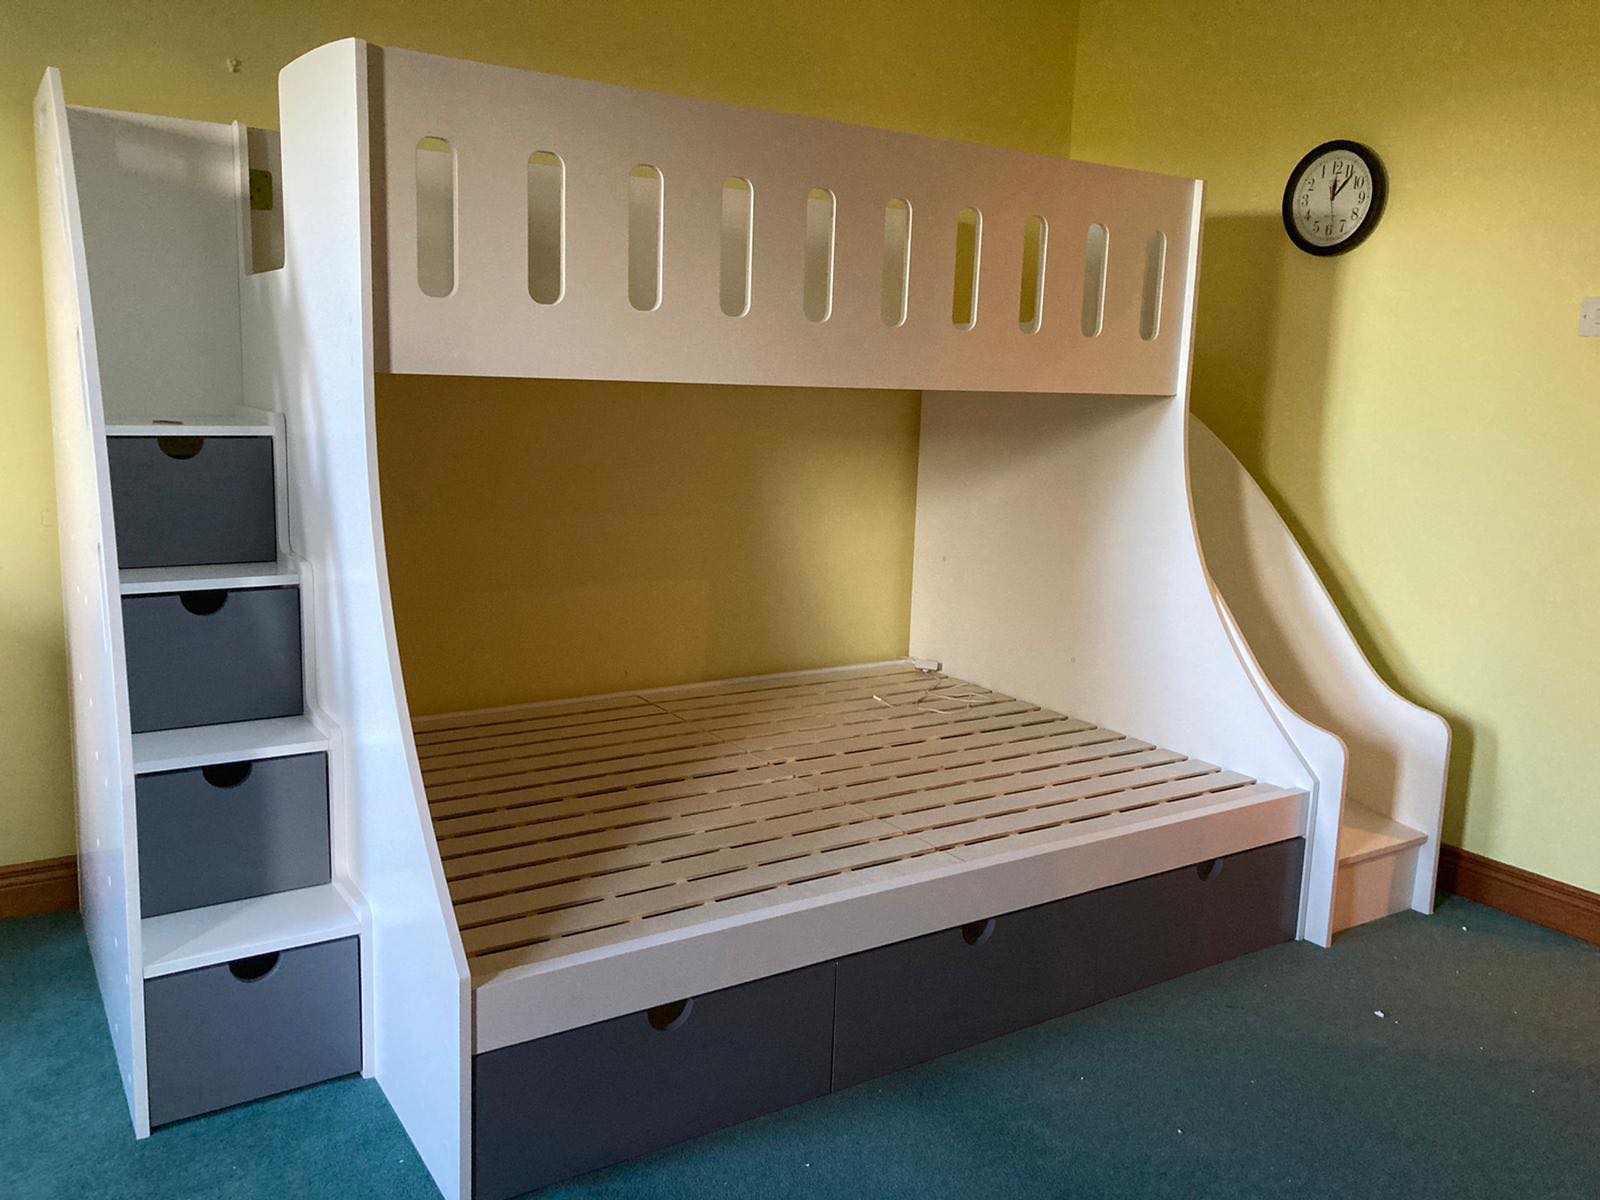 Can I Find A Princess Bunk Bed With Stairs?